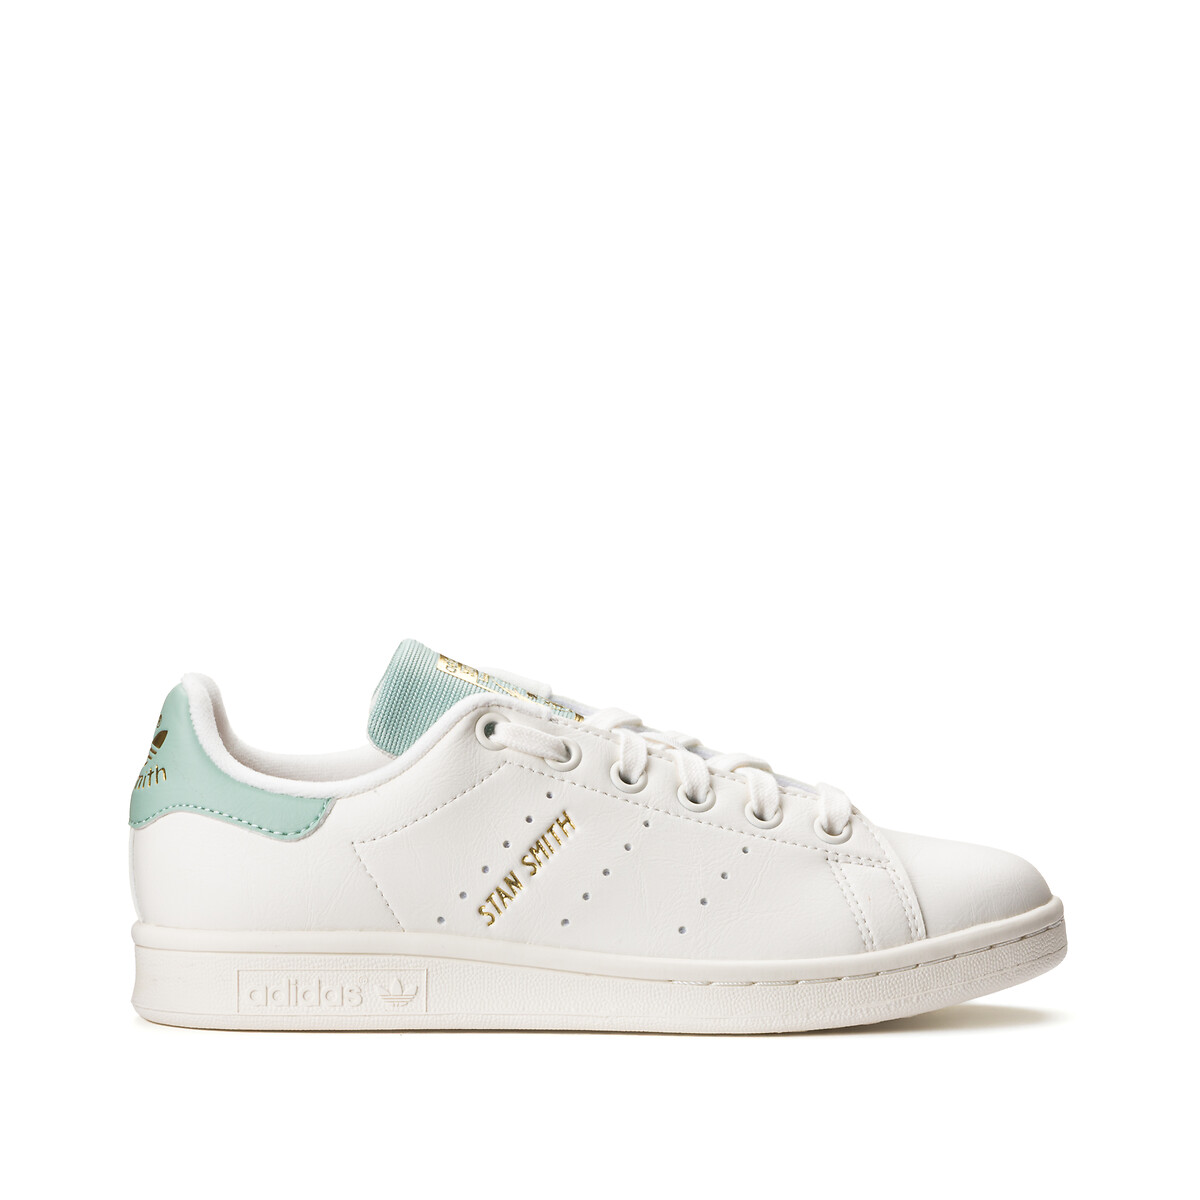 stan smith trainers size 7